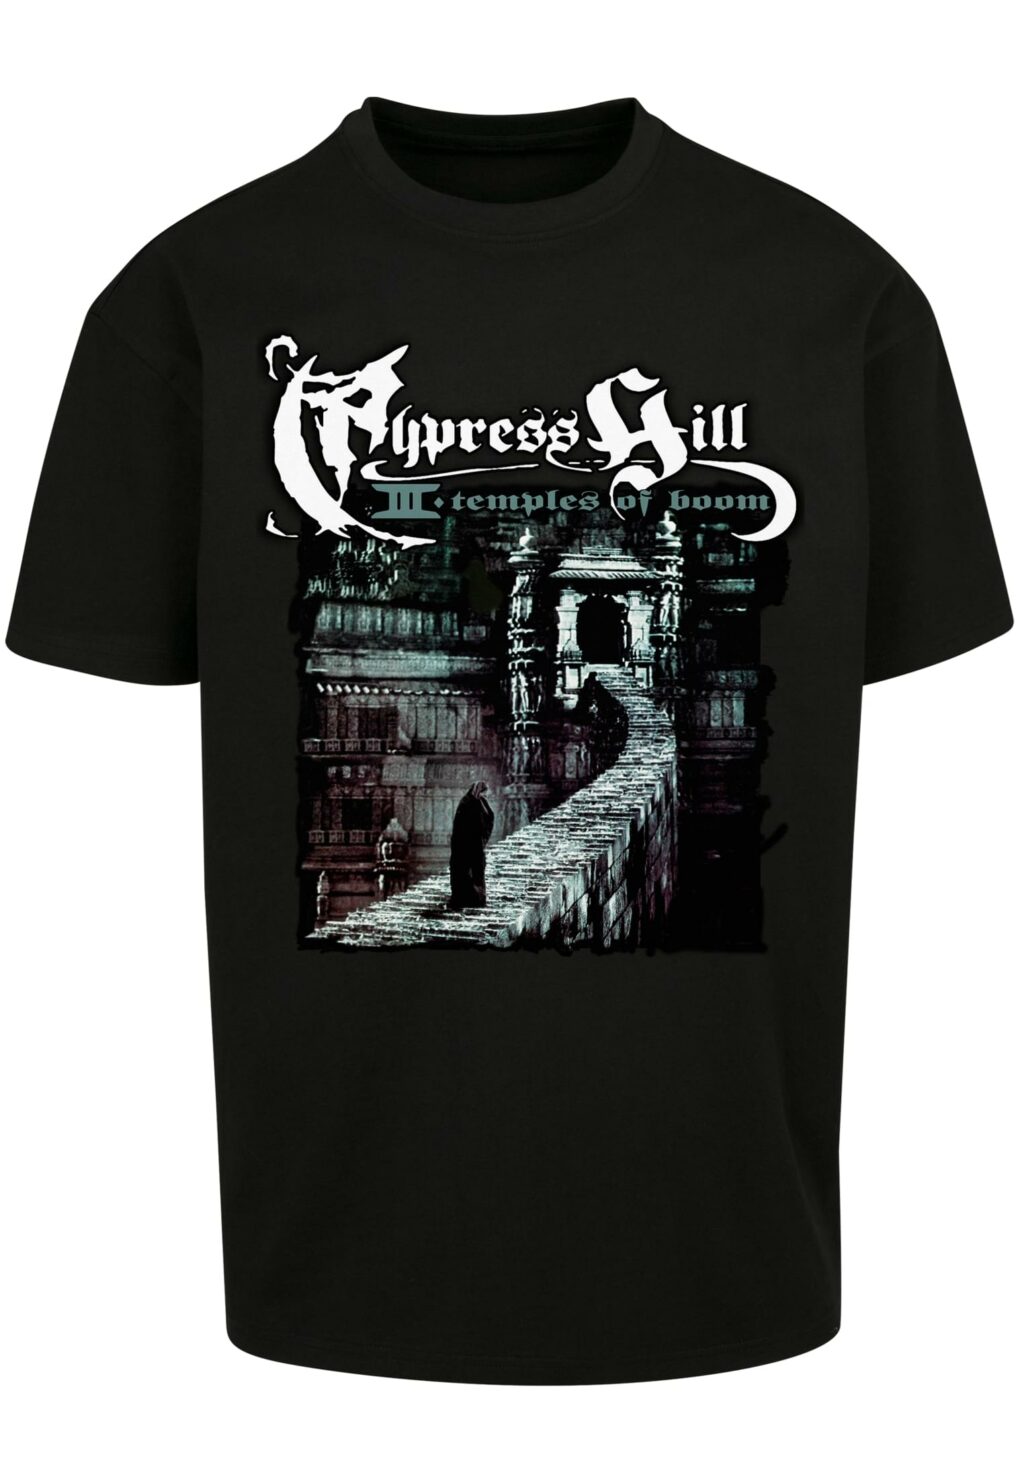 Cypress Hill Temples of Boom Oversize Tee black MT2410